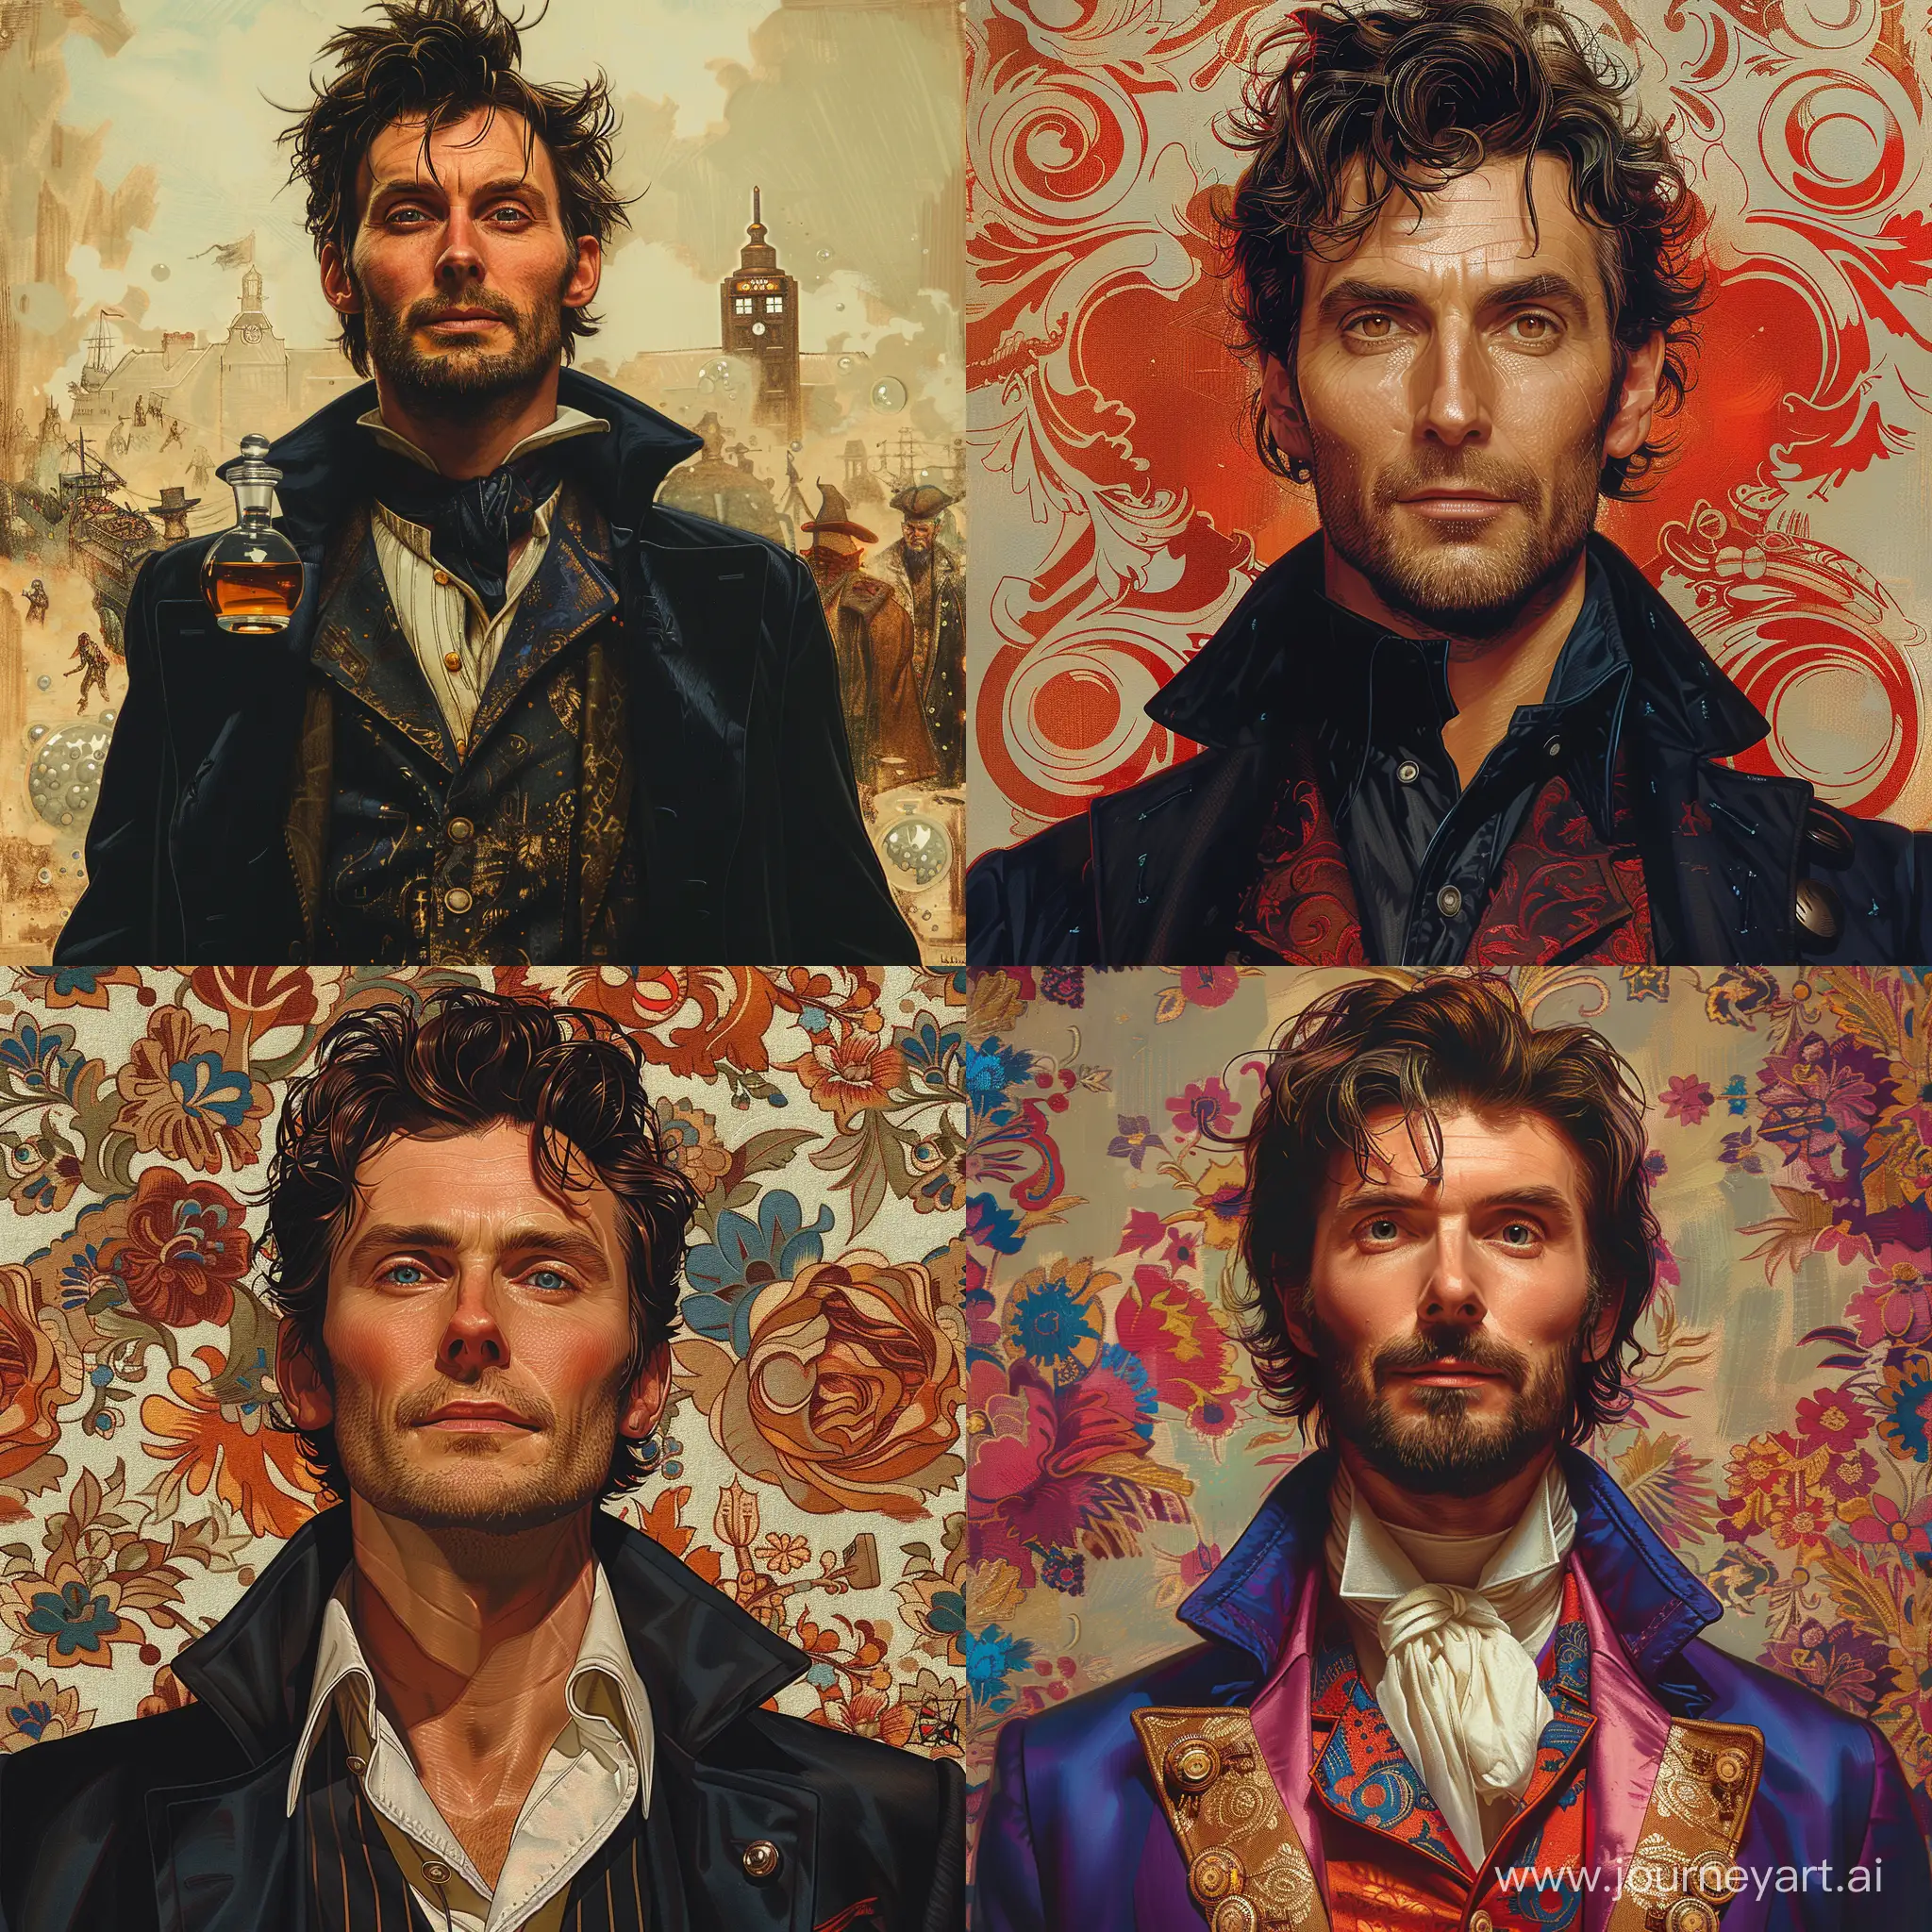 "Intricately detailed handsome David Tennant as Dr who from "Dr Who", Doctor Who with busy background, in style of Michael Kaluta, Aleksandr Kuskov, Christophe Heughe --stylize 750